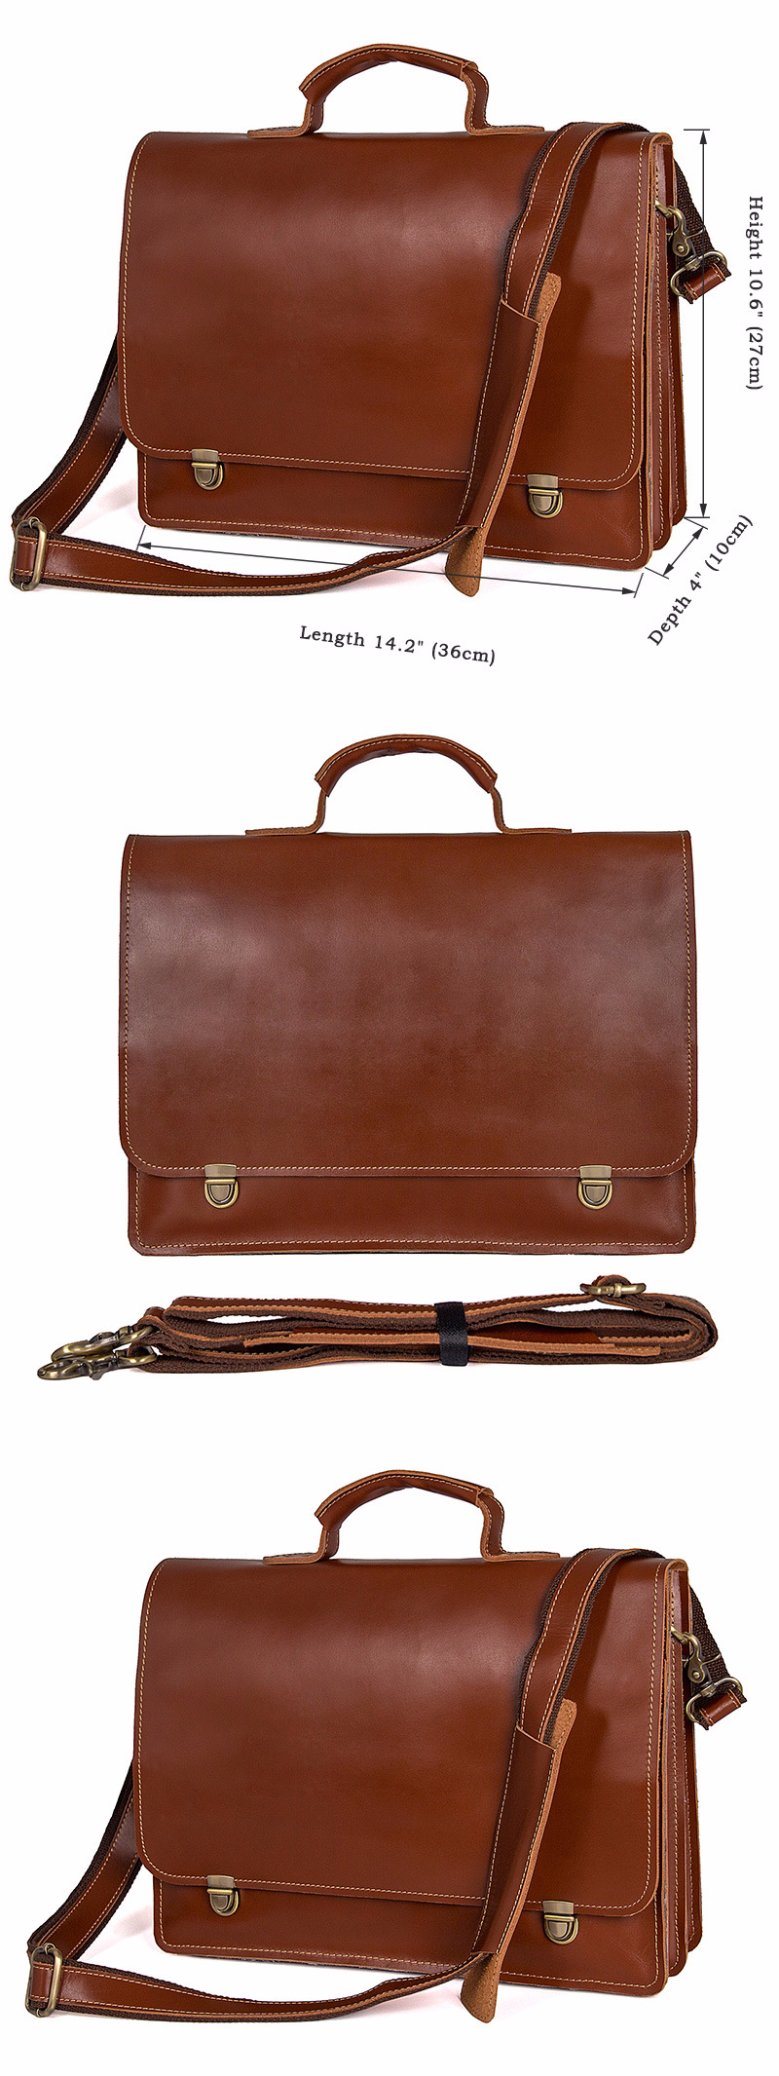 Leisure Style Good Quality Large Capacity Laptop Bag Briefcase Leather Business Bag